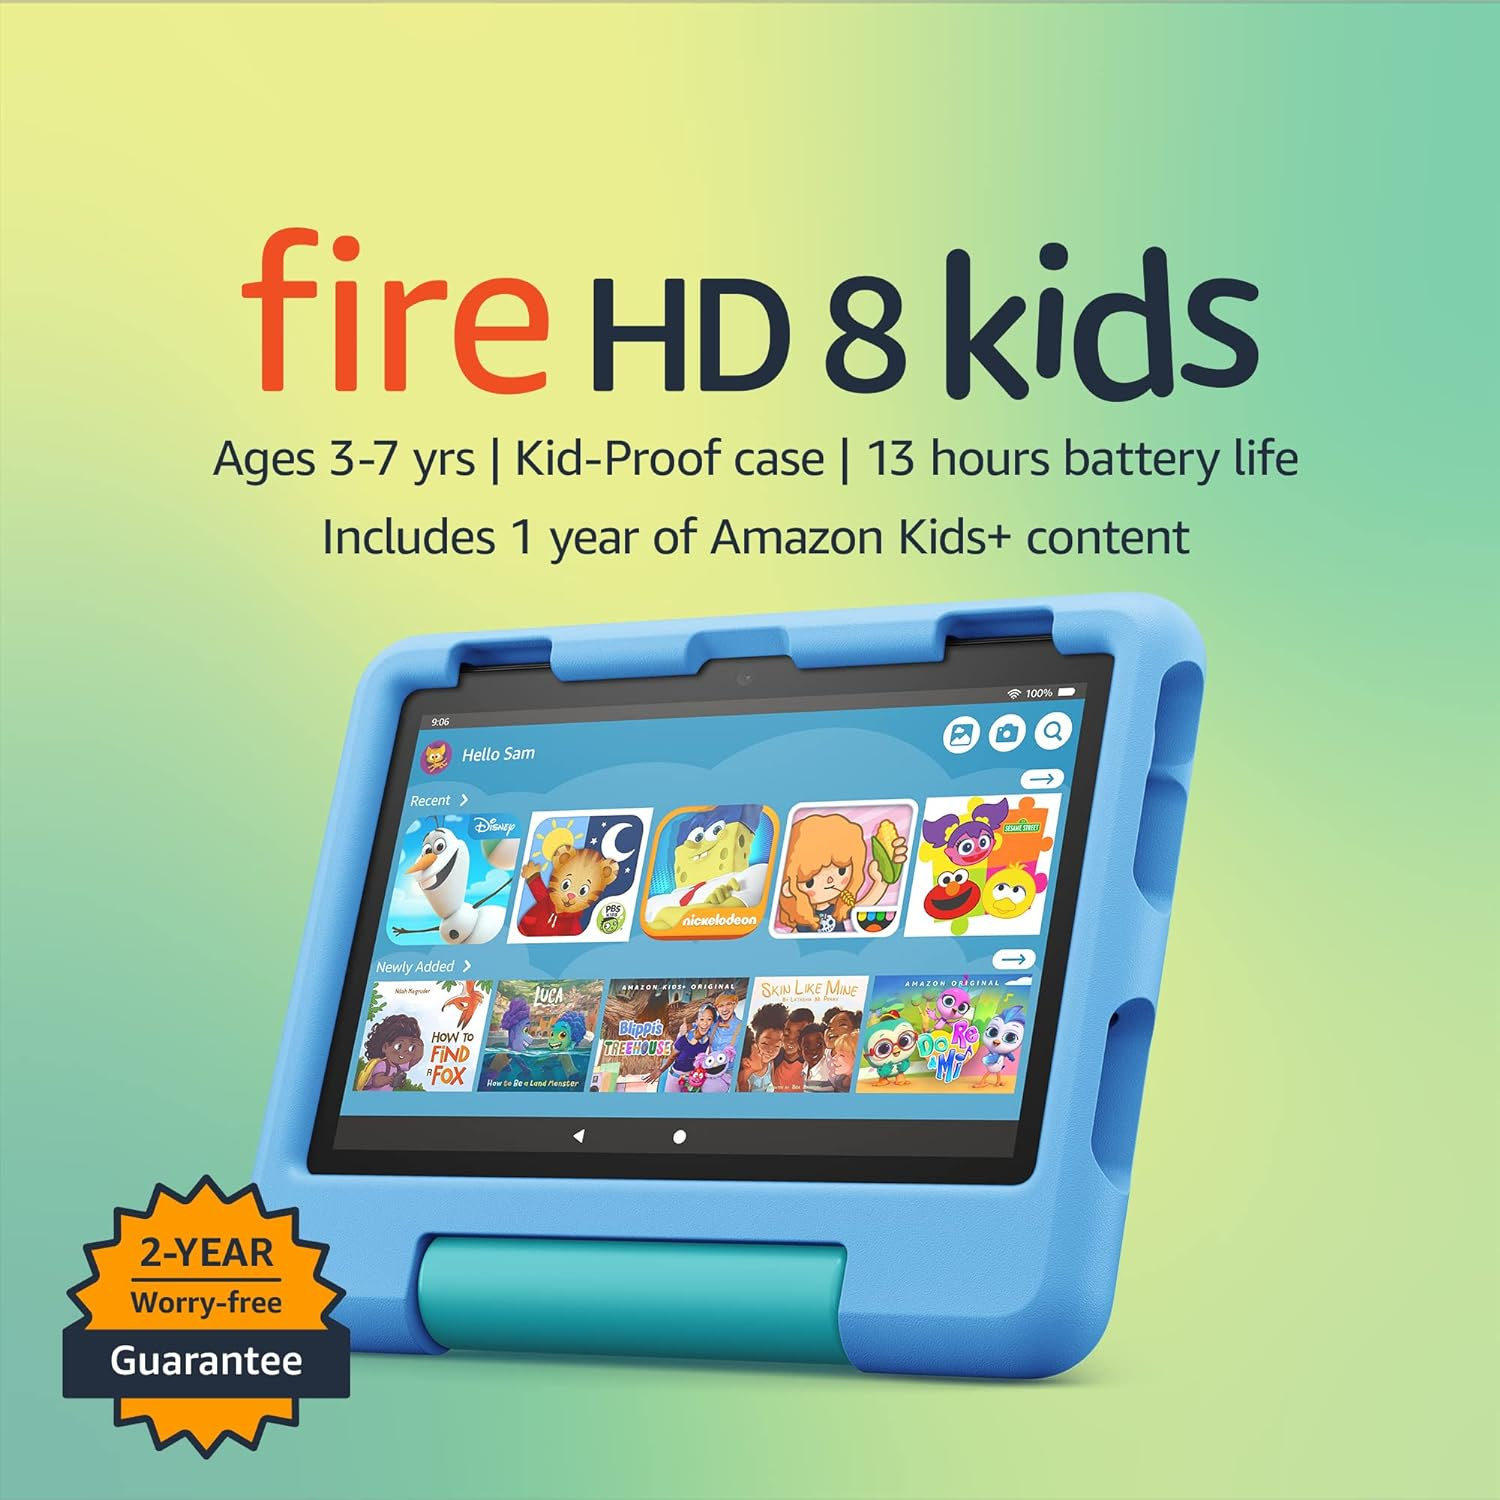 Amazon Fire HD 8 Kids tablet, ages 3-7. Top-selling 8 kids tablet on Amazon - 2022 | ad-free content with parental controls included, 13-hr battery, 64 GB, Blue